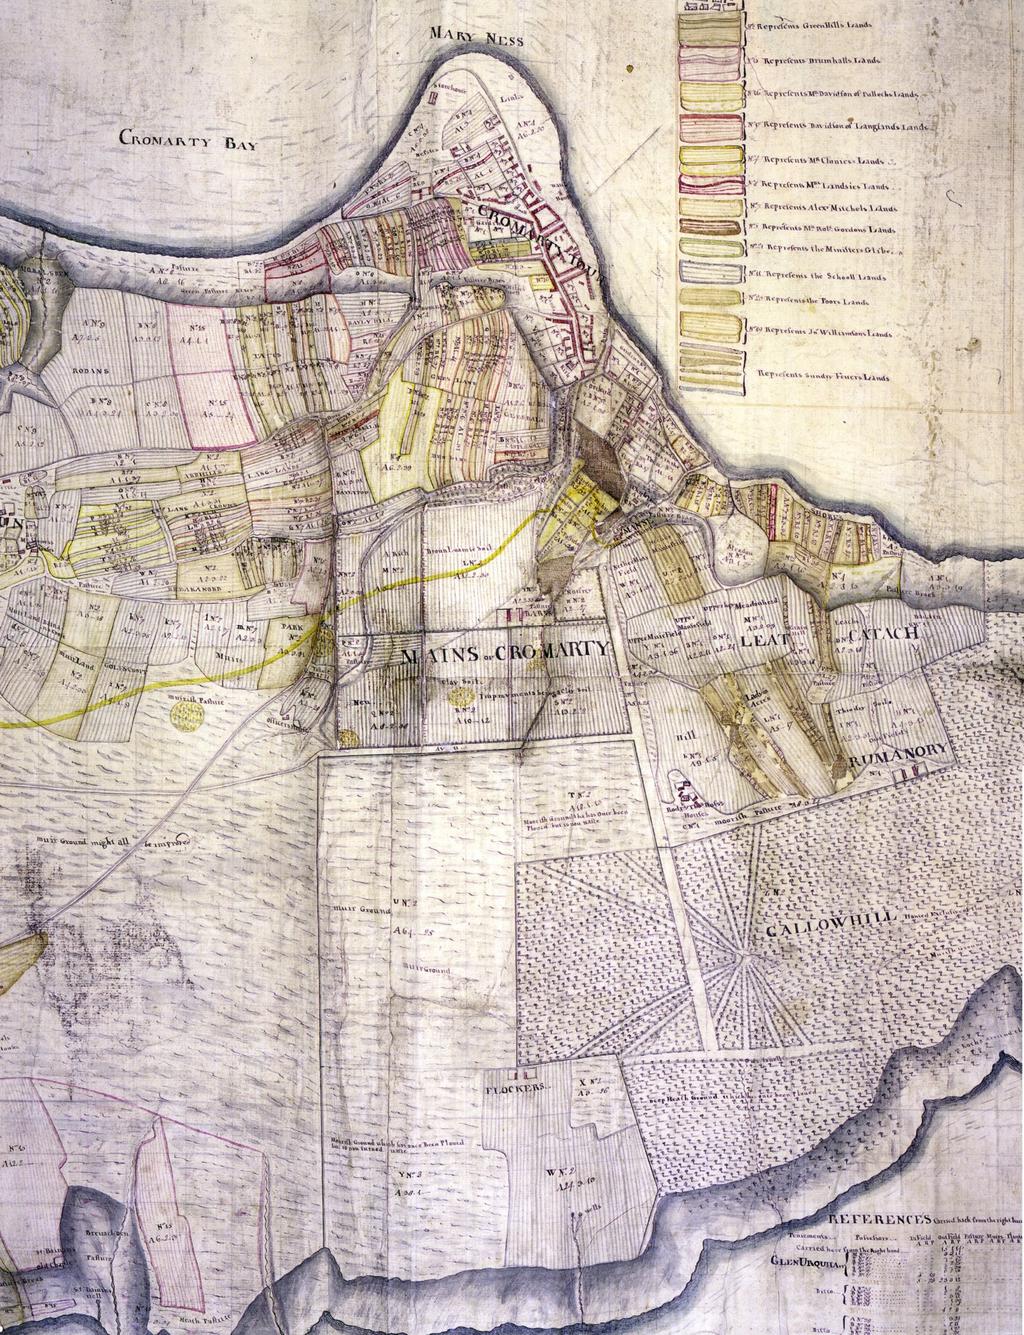 Thief s Row and Castle Street David Aitken s Estate Map of 1763 David Aitken s estate map published in 1763 is our earliest detailed map of the burgh of Cromarty.